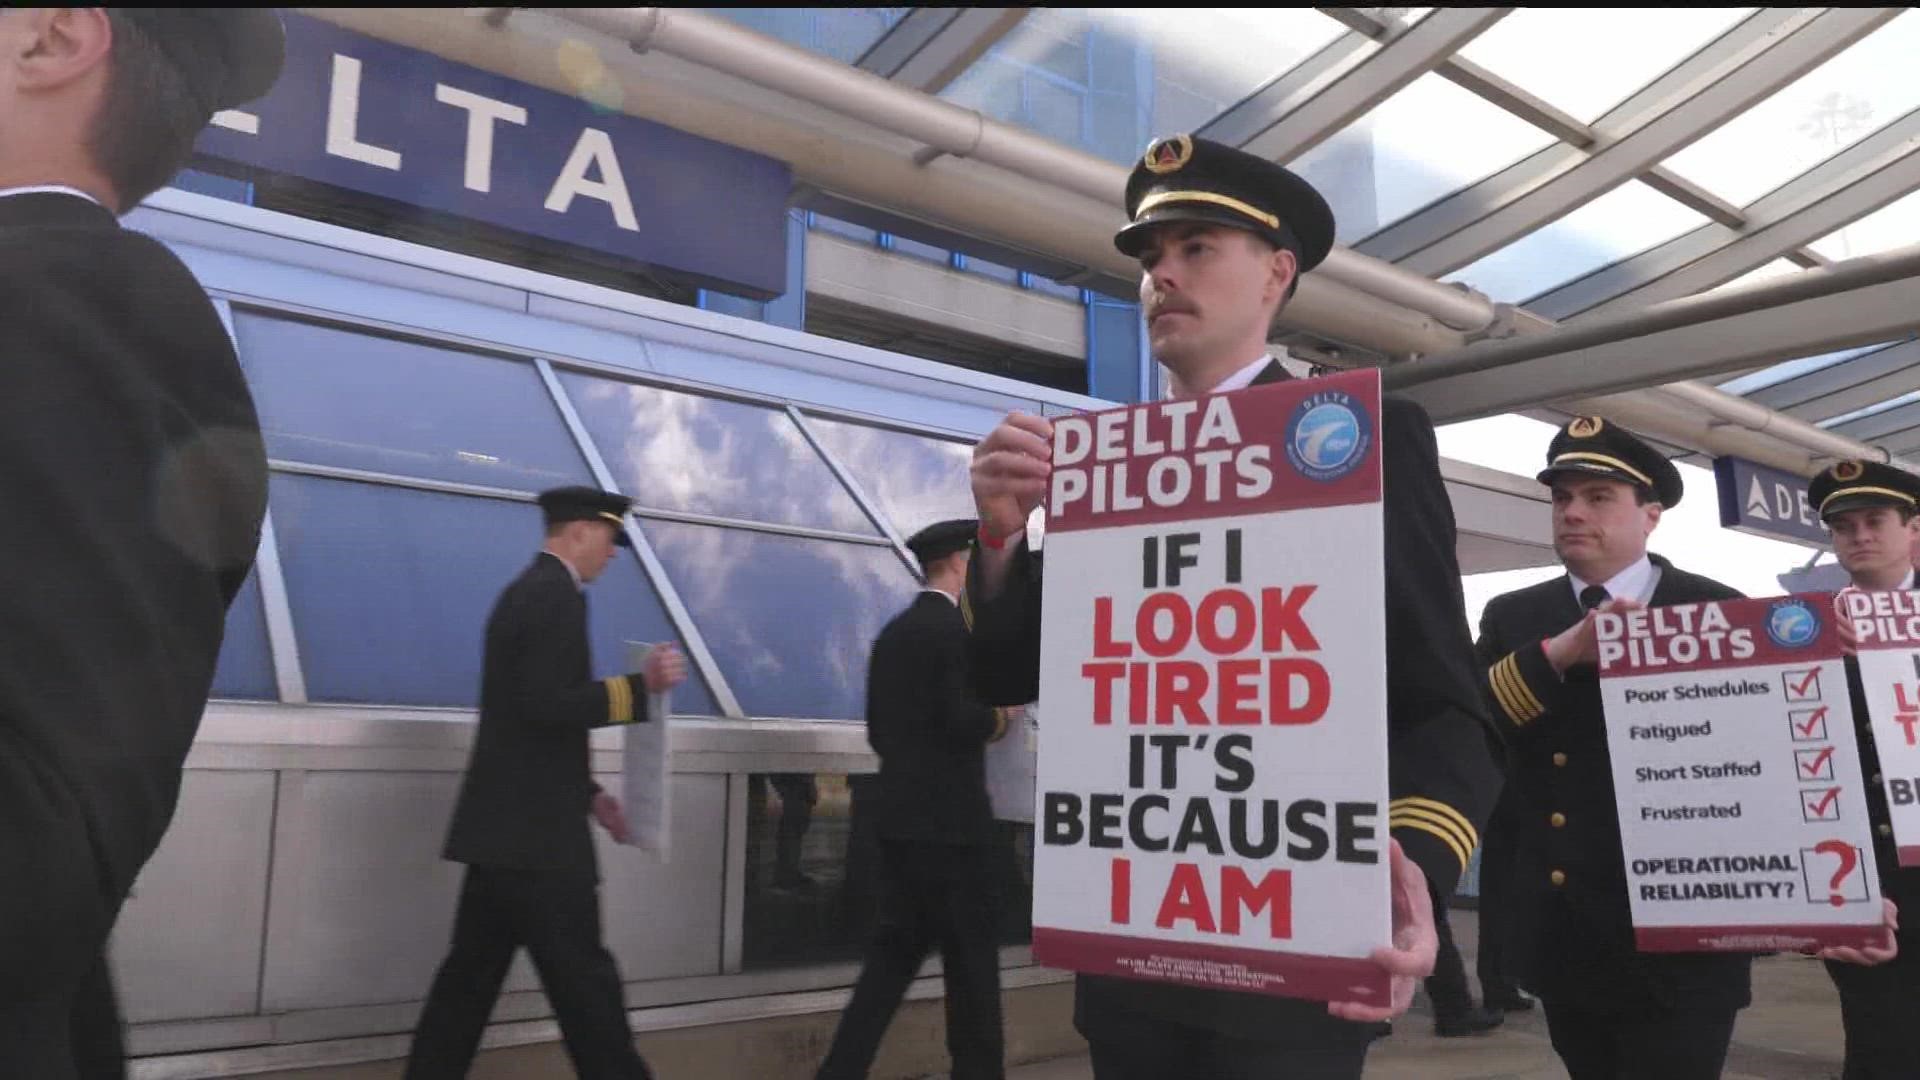 Over 100 Delta Air Lines pilots picketed at MSP Airport Thursday, saying they're now working longer days with shorter rest periods as flights start to pick up again.